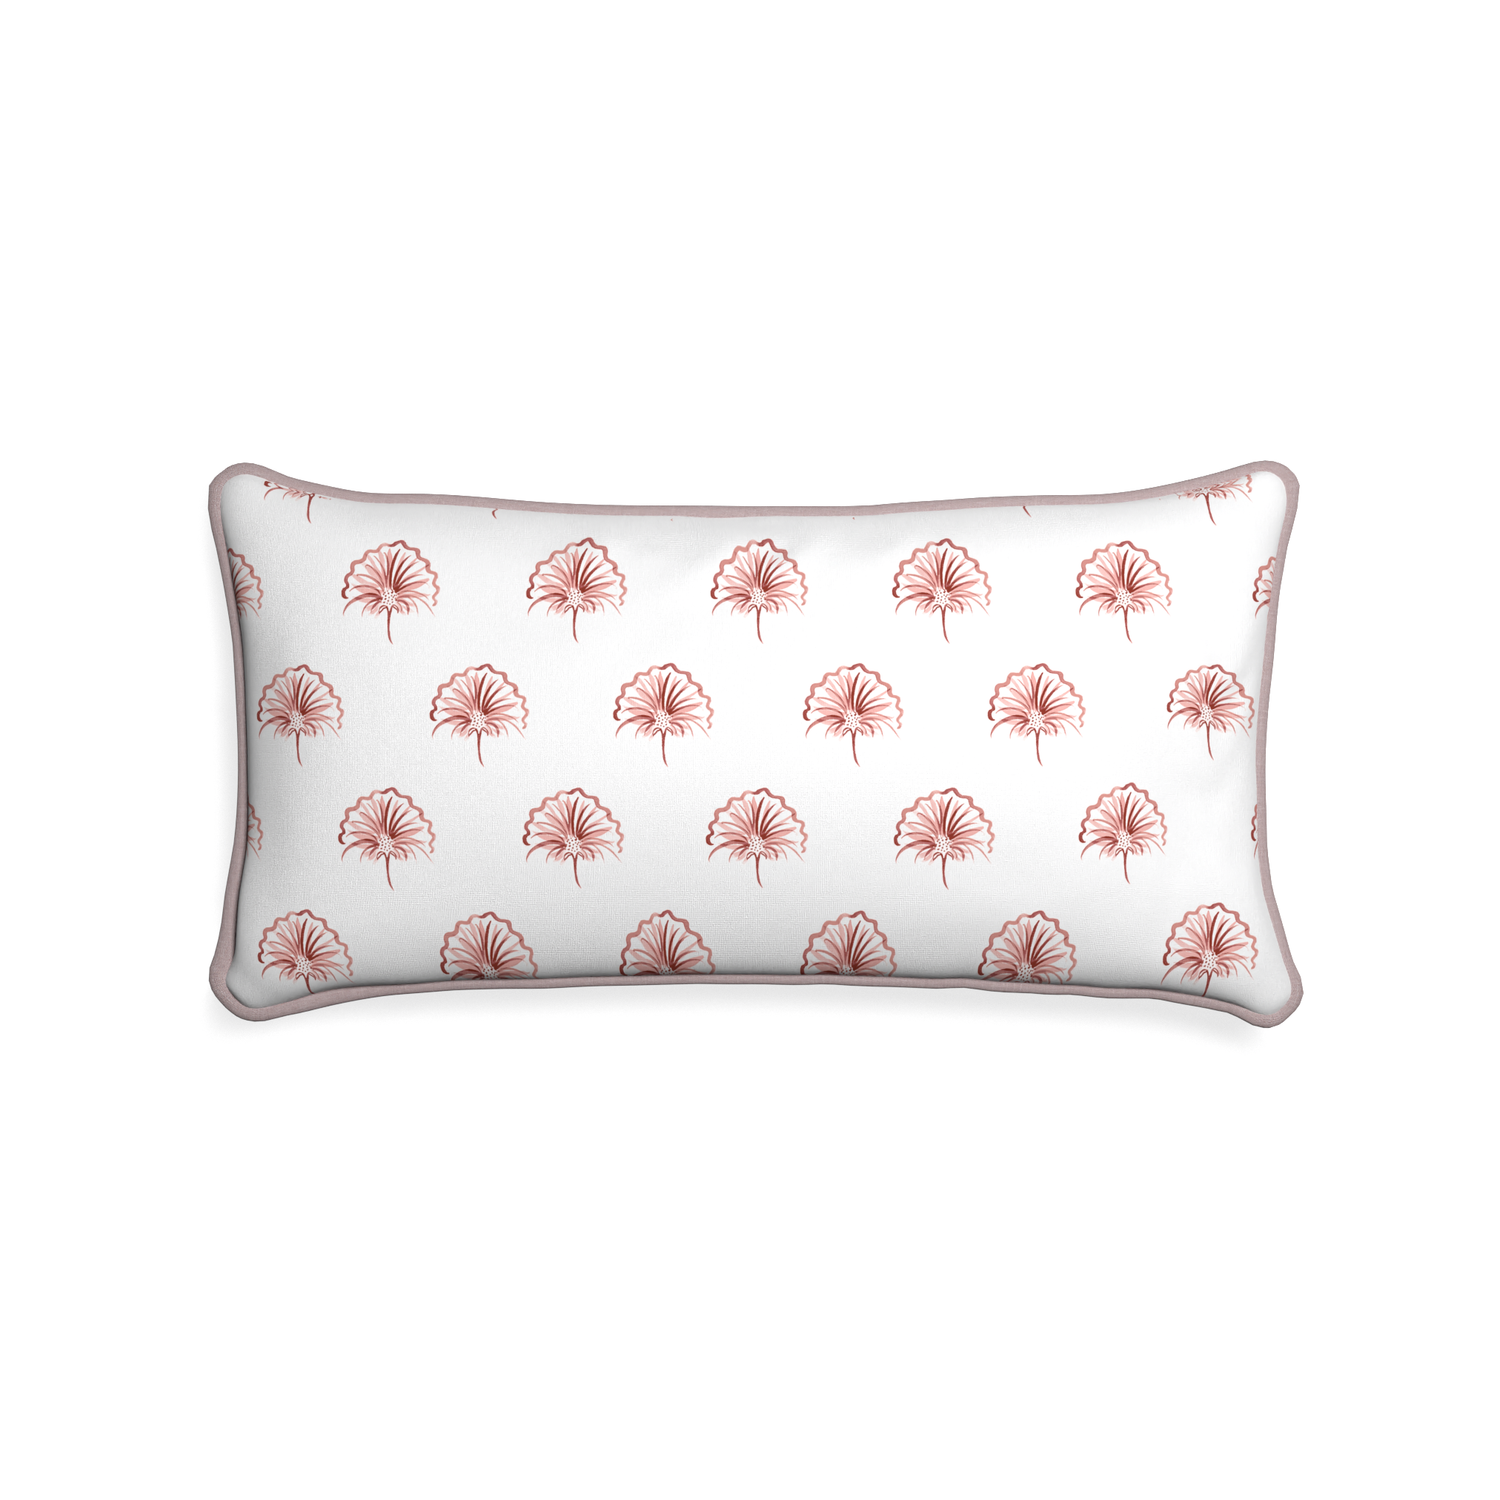 Midi-lumbar penelope rose custom floral pinkpillow with orchid piping on white background